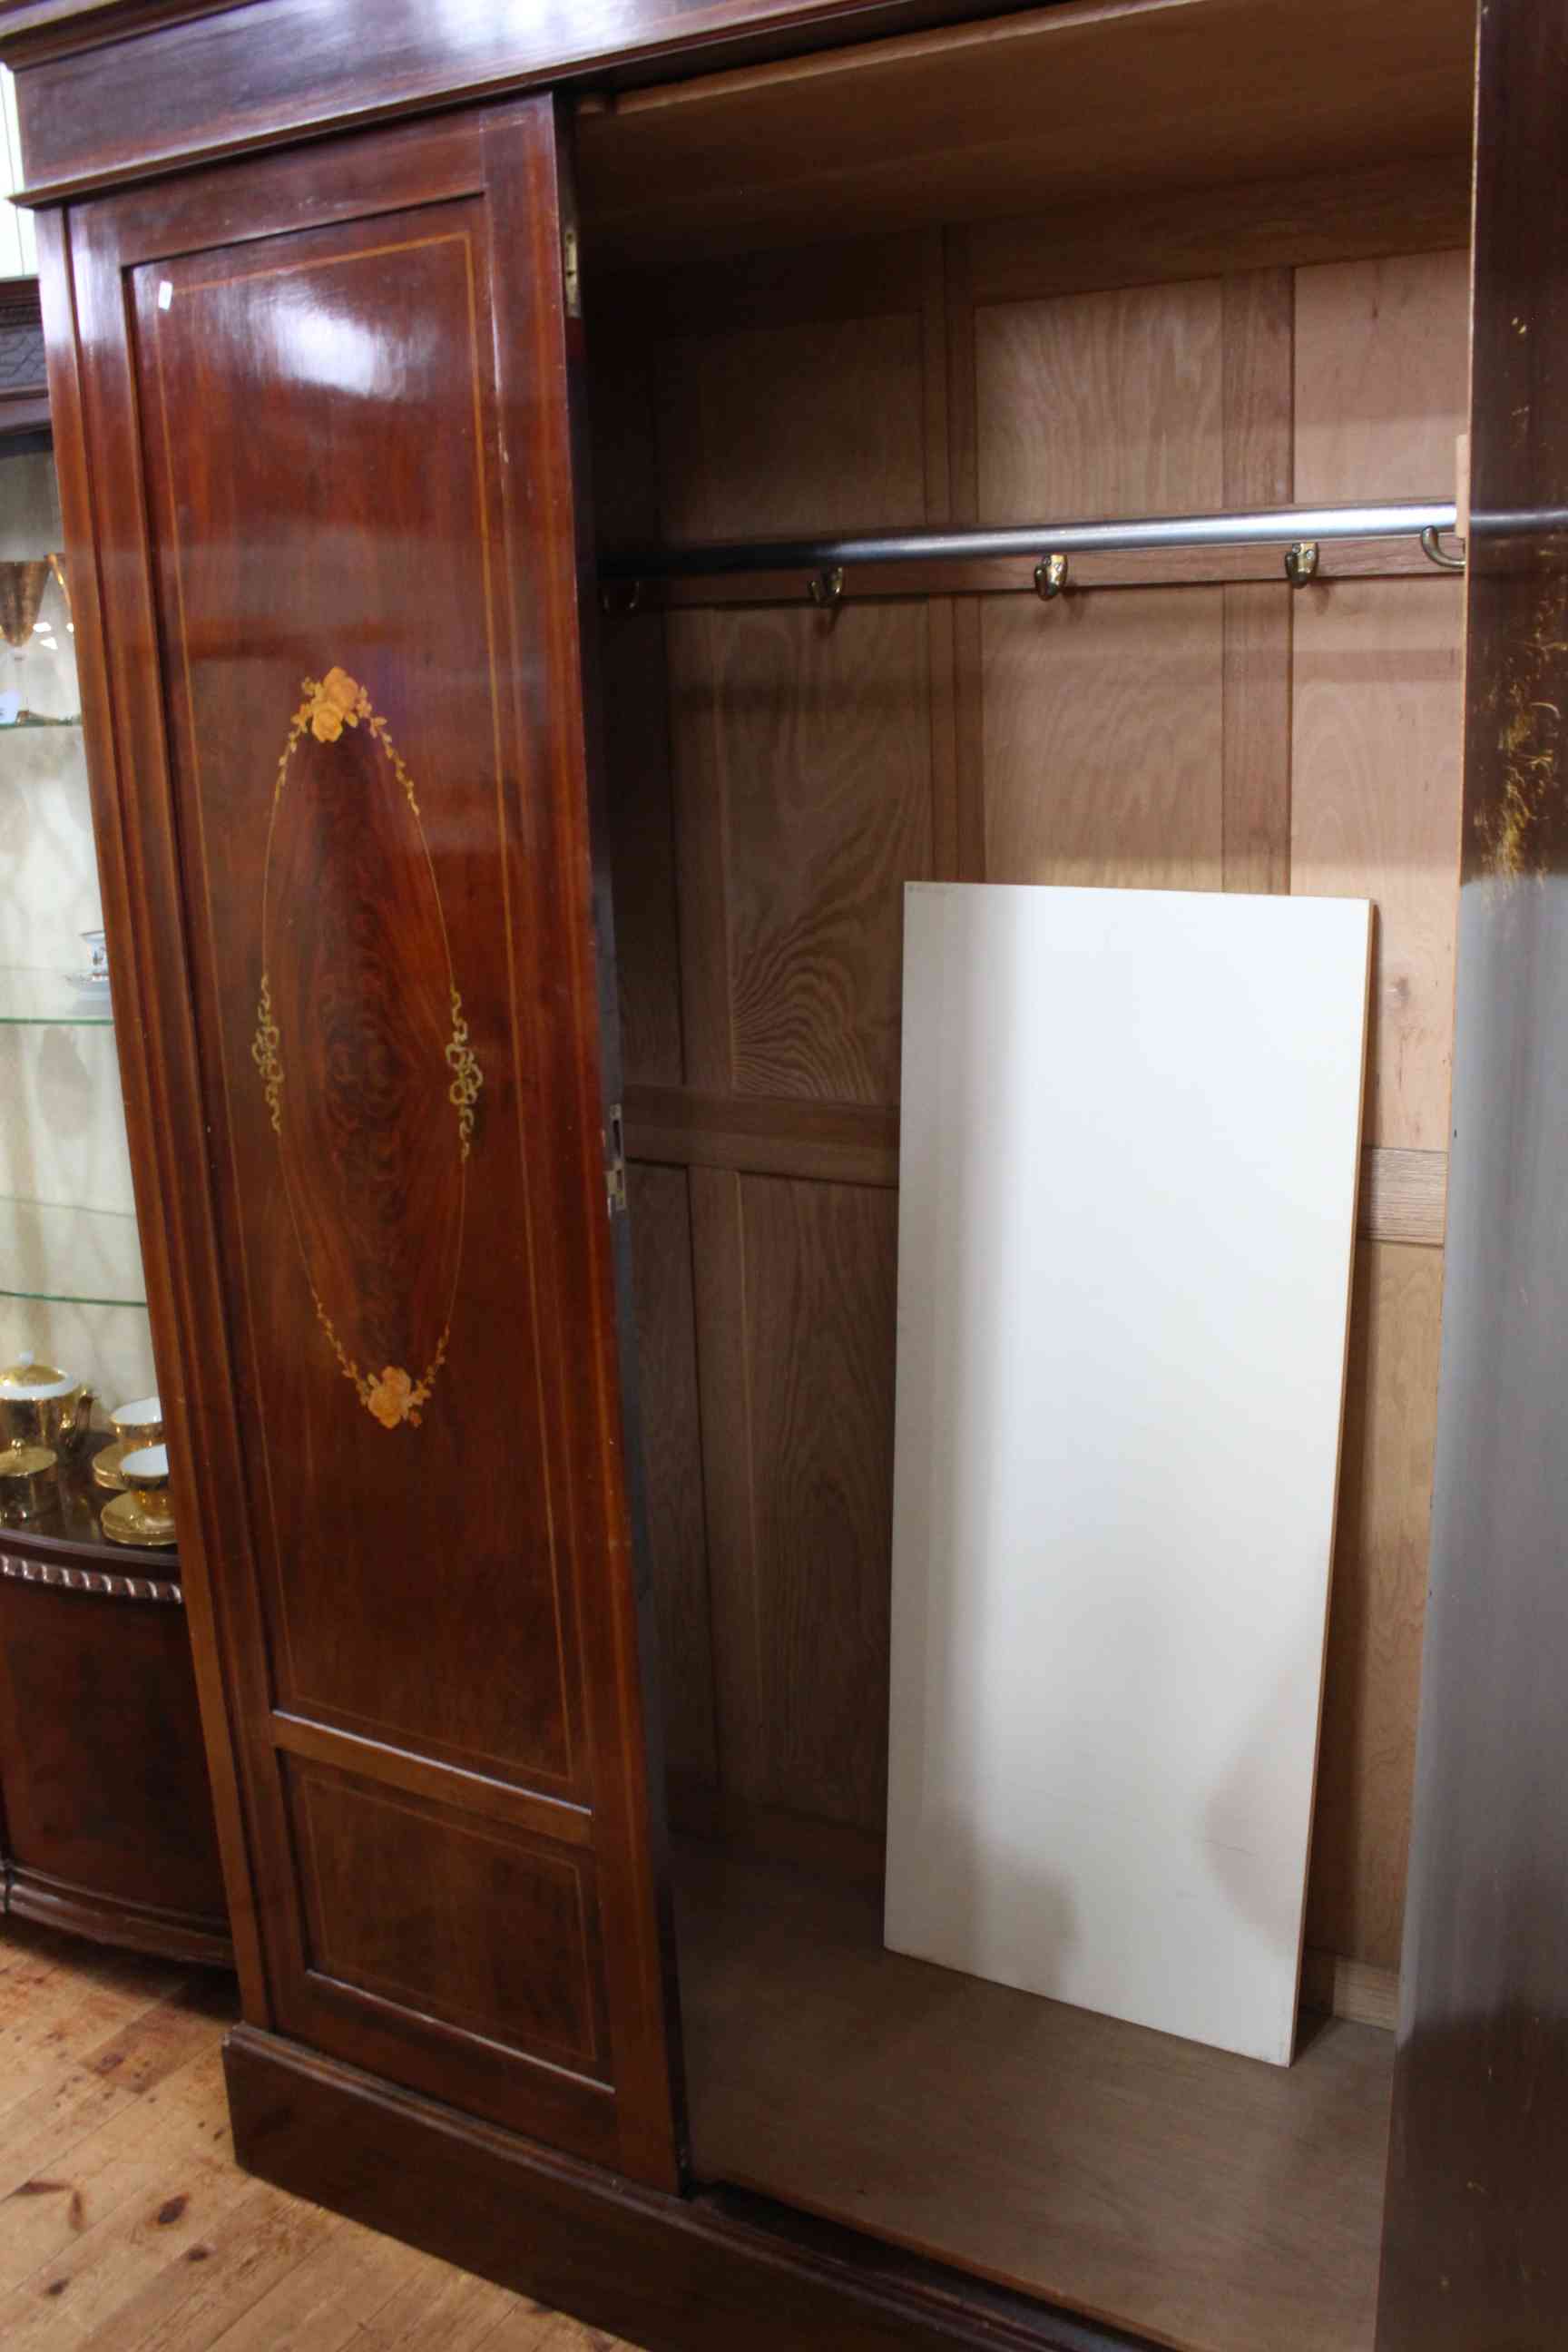 Edwardian inlaid mahogany wardrobe having central mirror door flanked by two inlaid doors, - Image 2 of 2